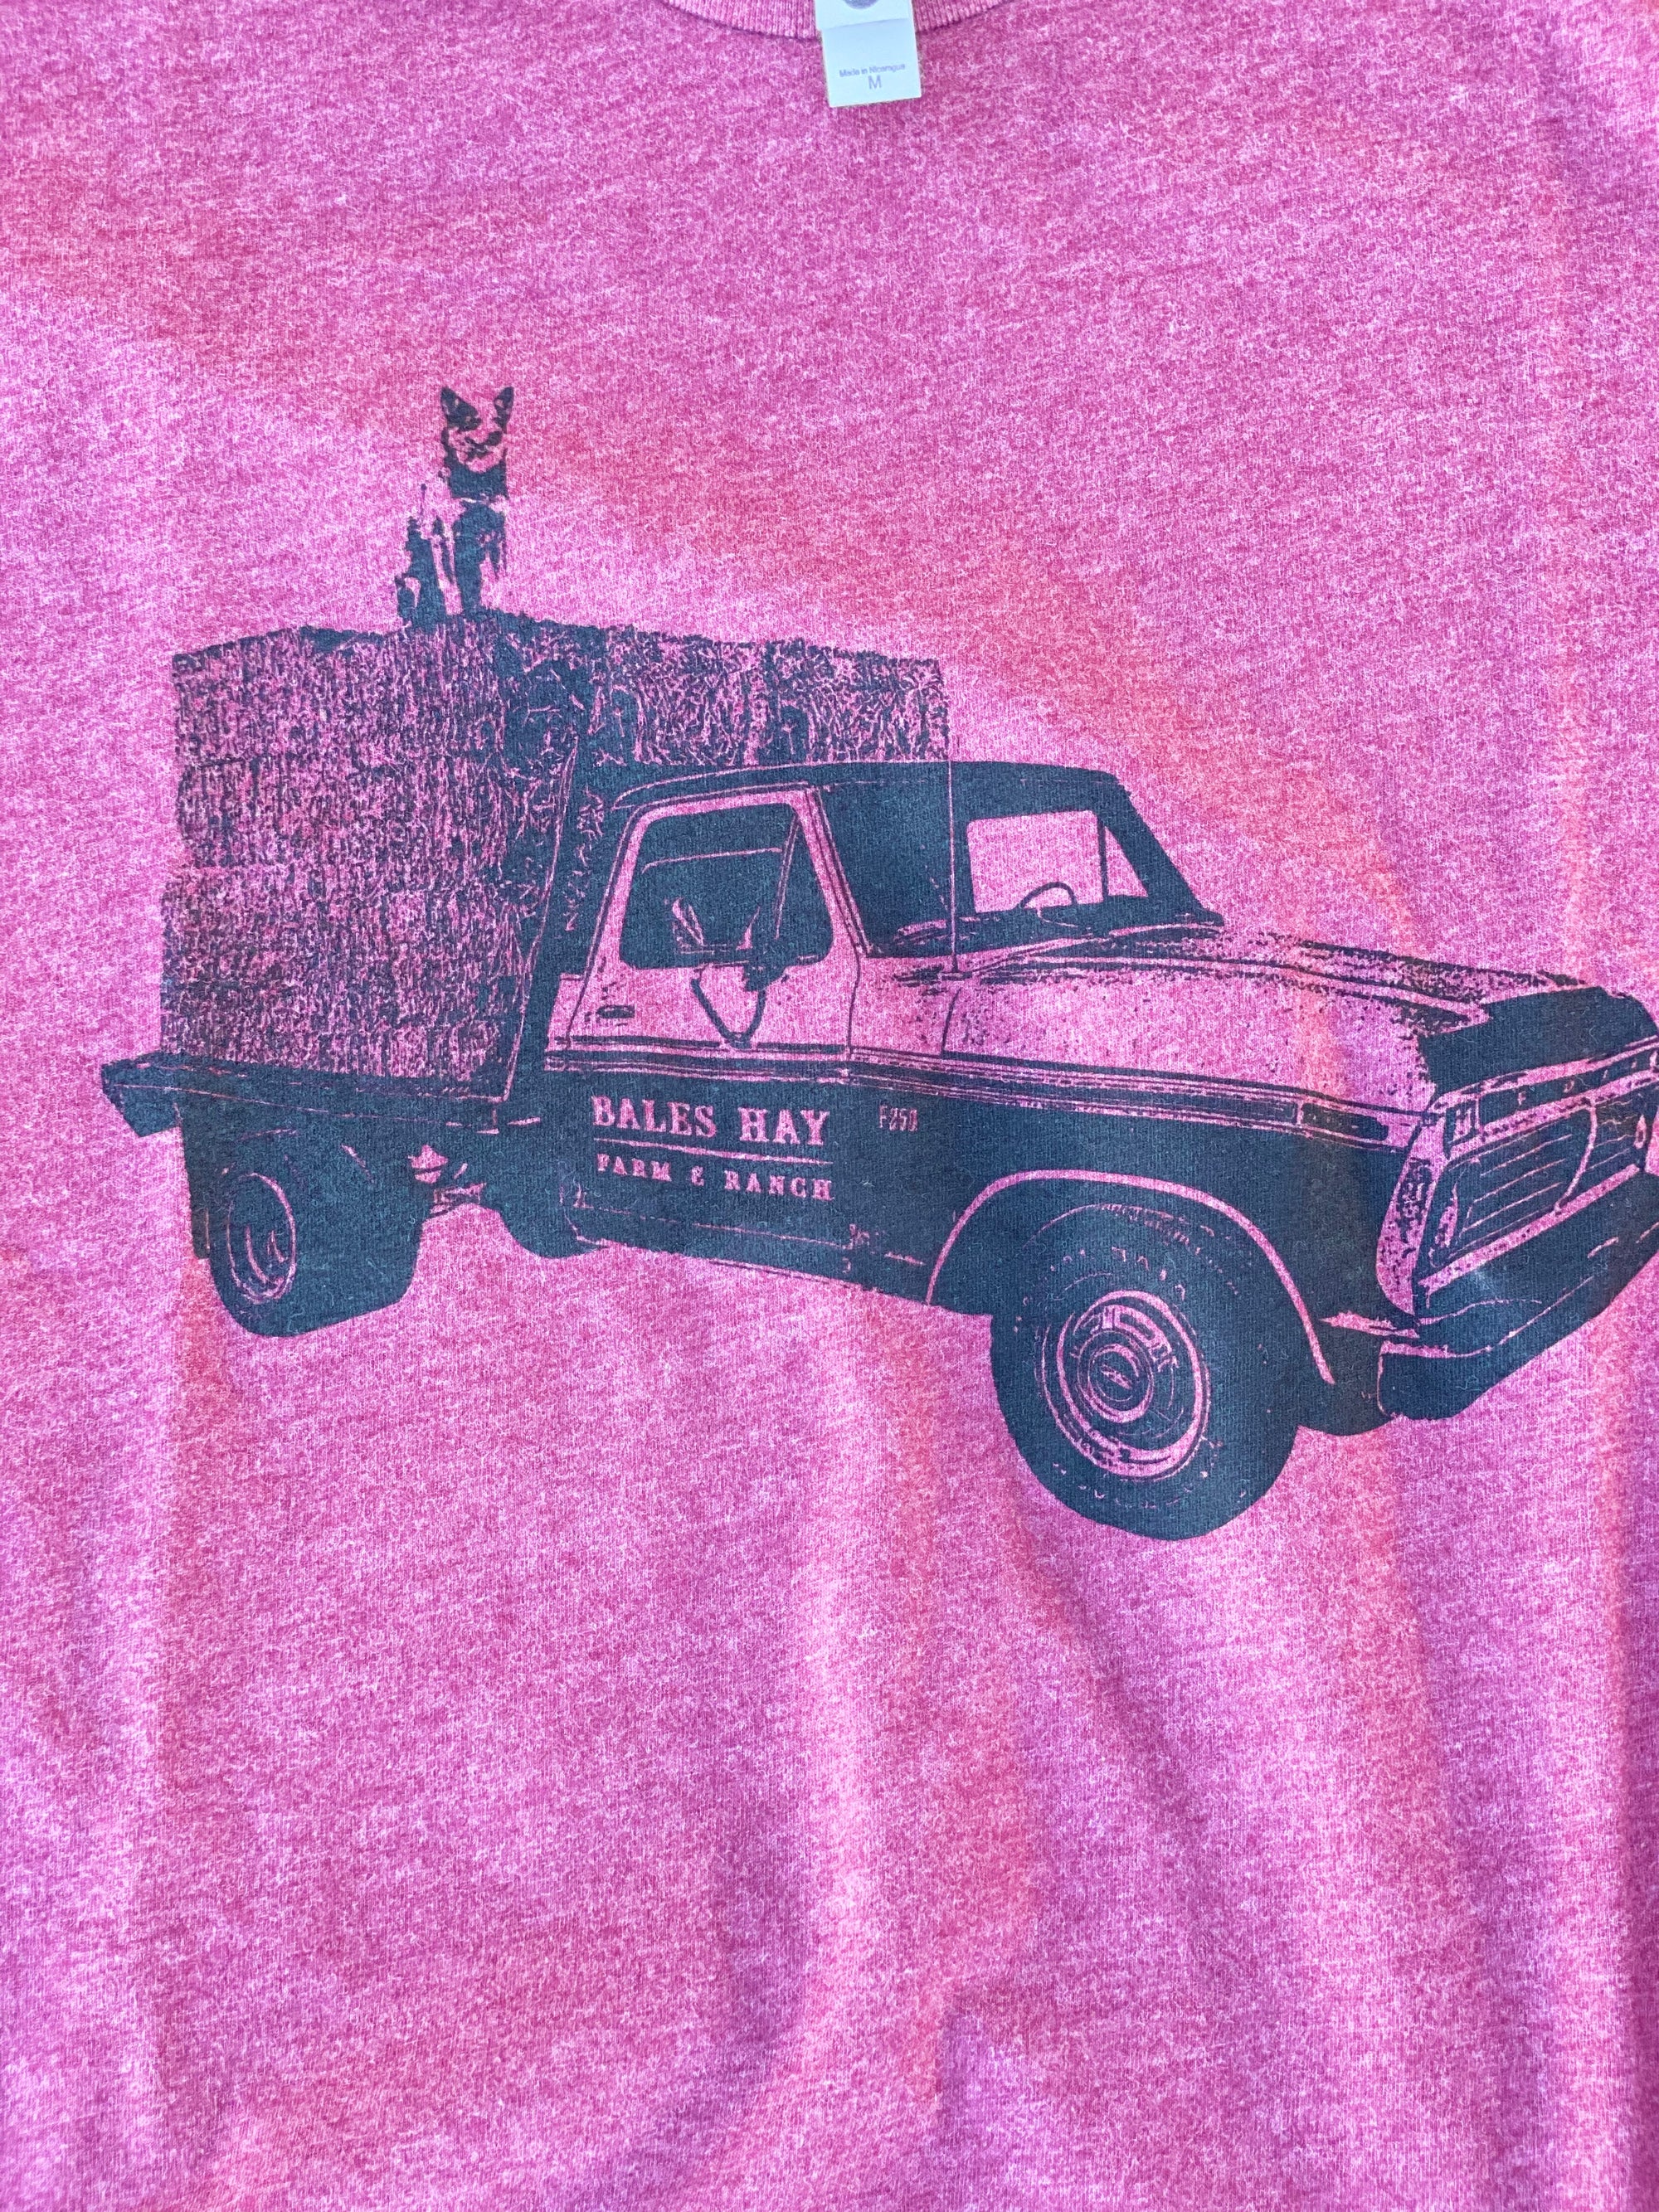 Load Up Flat Bed Ford Tee [ 2 Colors ]